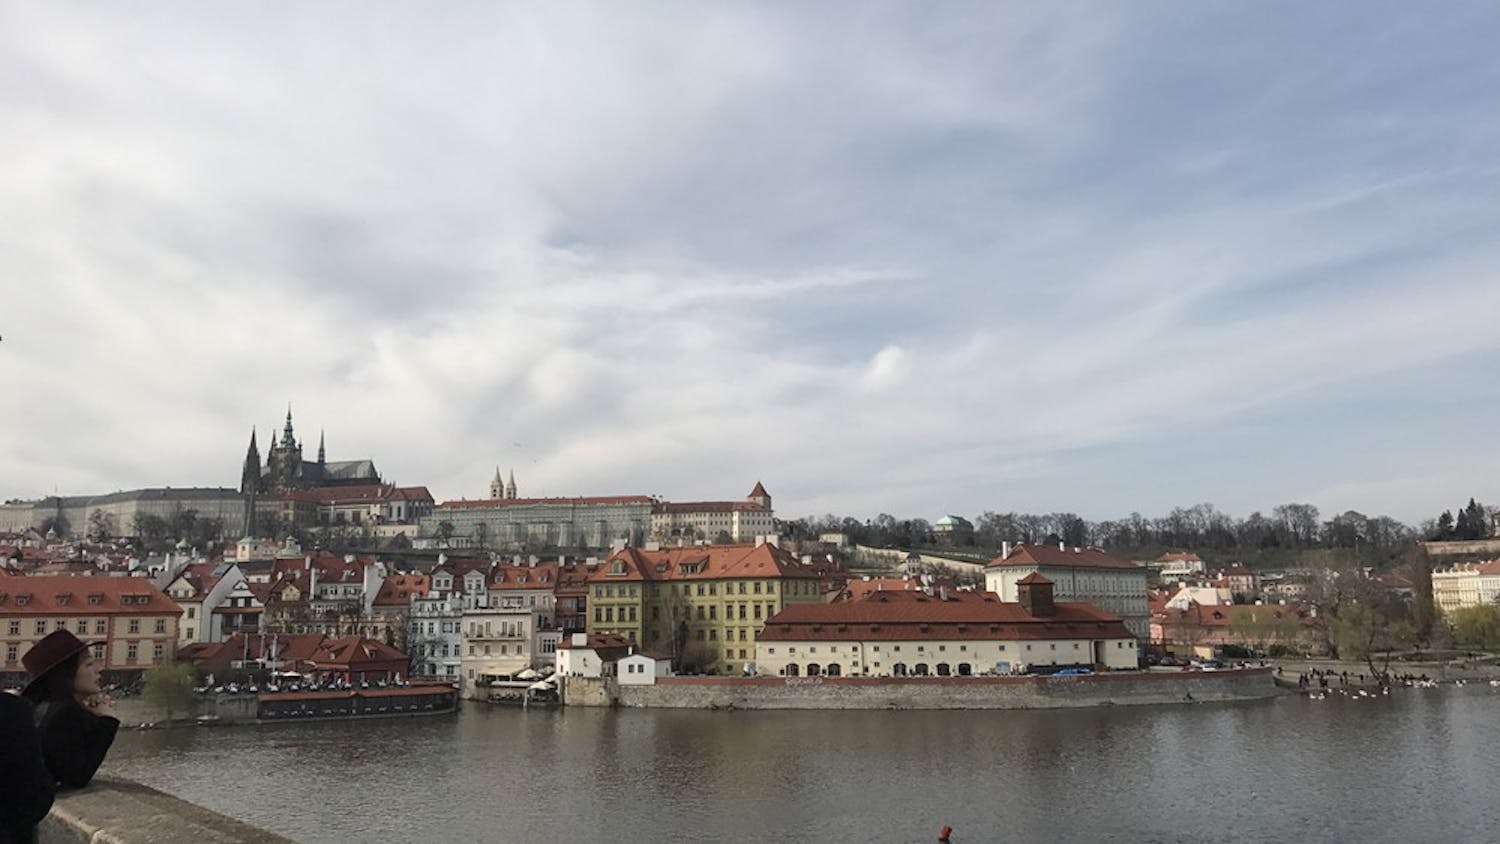 The city of Prague offers opportunities to examine a variety of cultural sites including the Prague Castle, seen from the Charles Bridge.